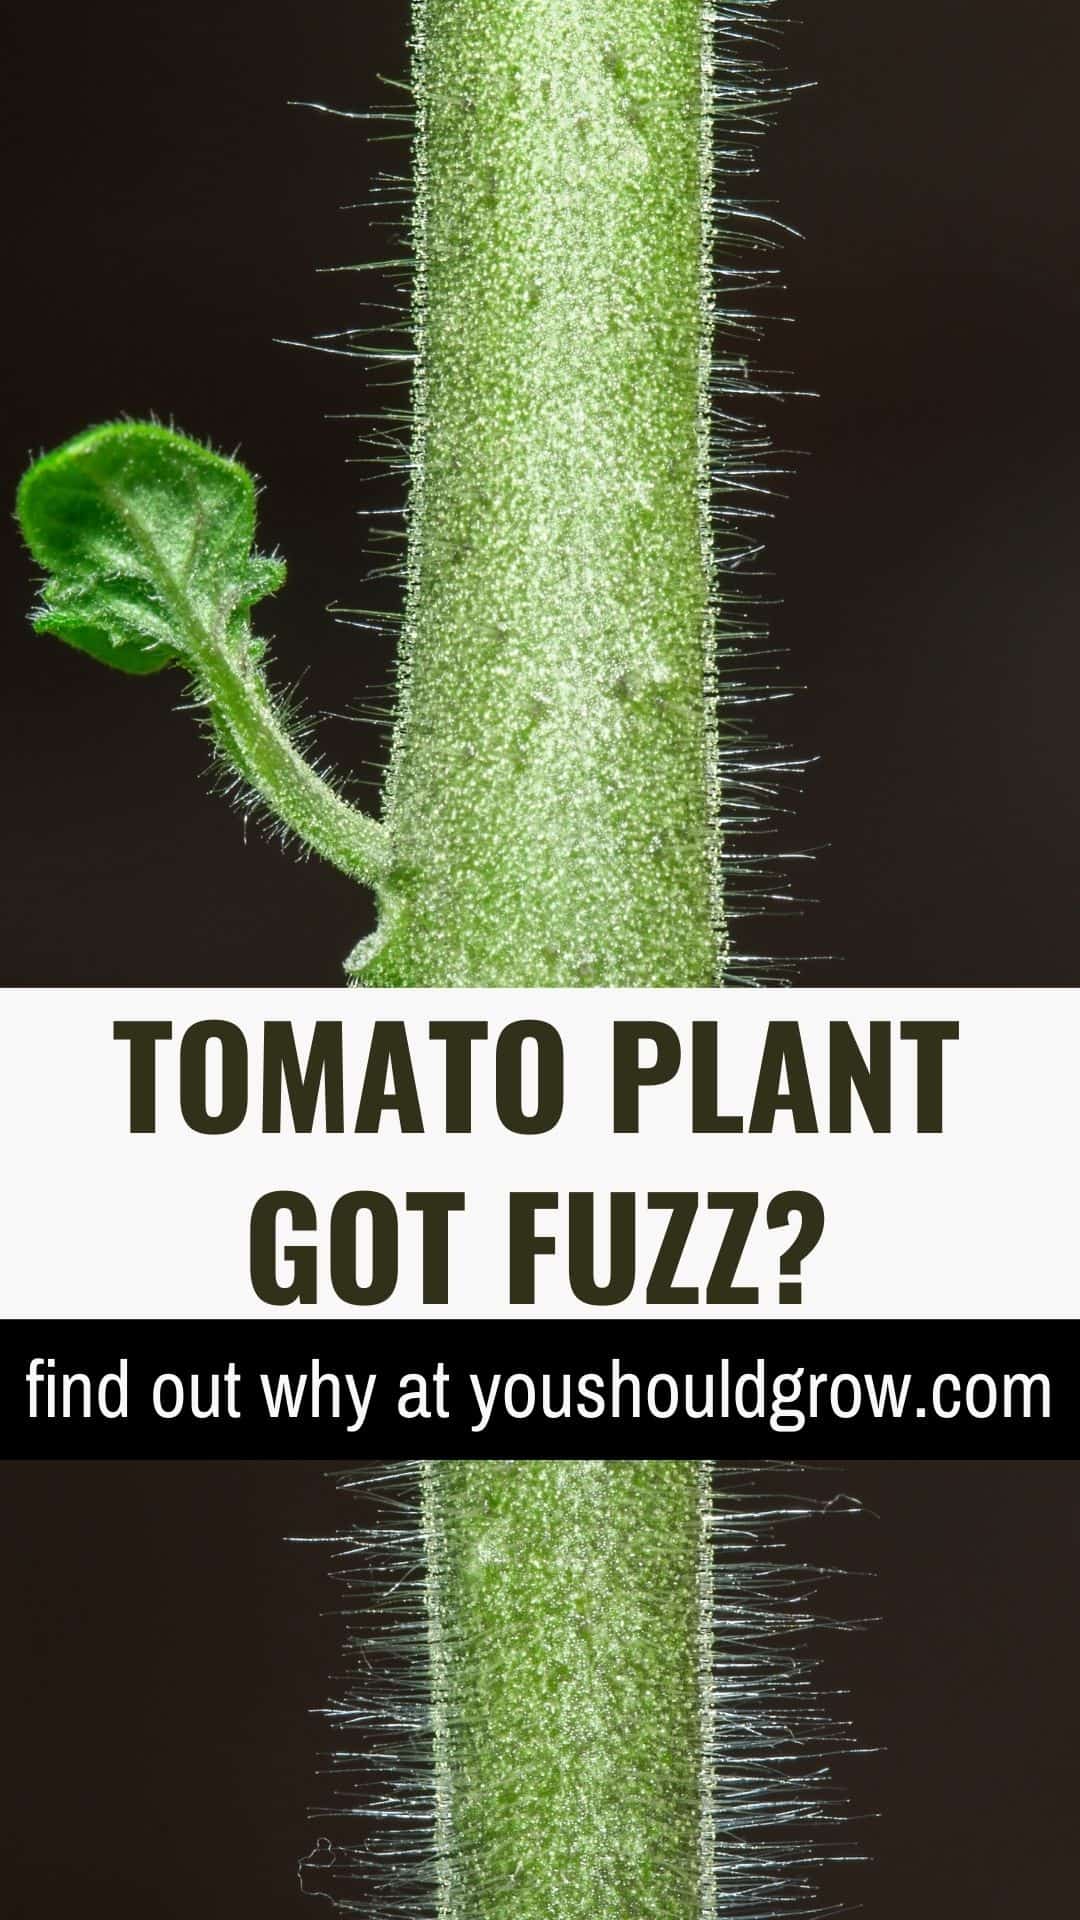 What You Need To Know About The Hair On Your Tomato Plant